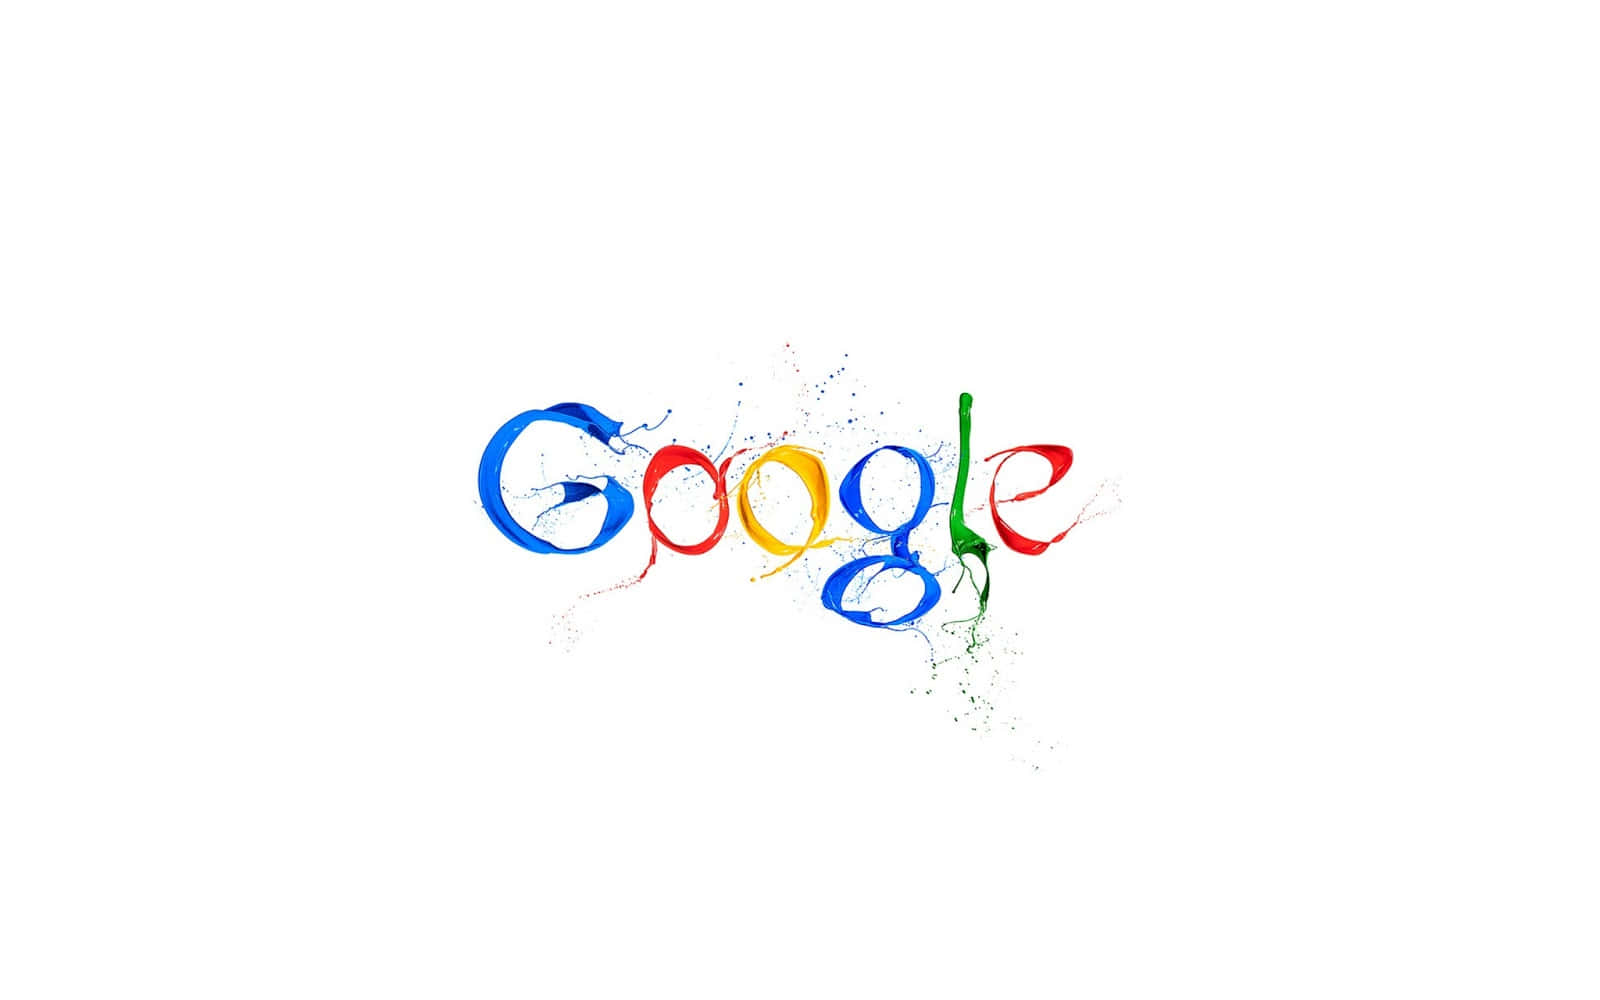 Stay on top of the Trends with Google Best Wallpaper